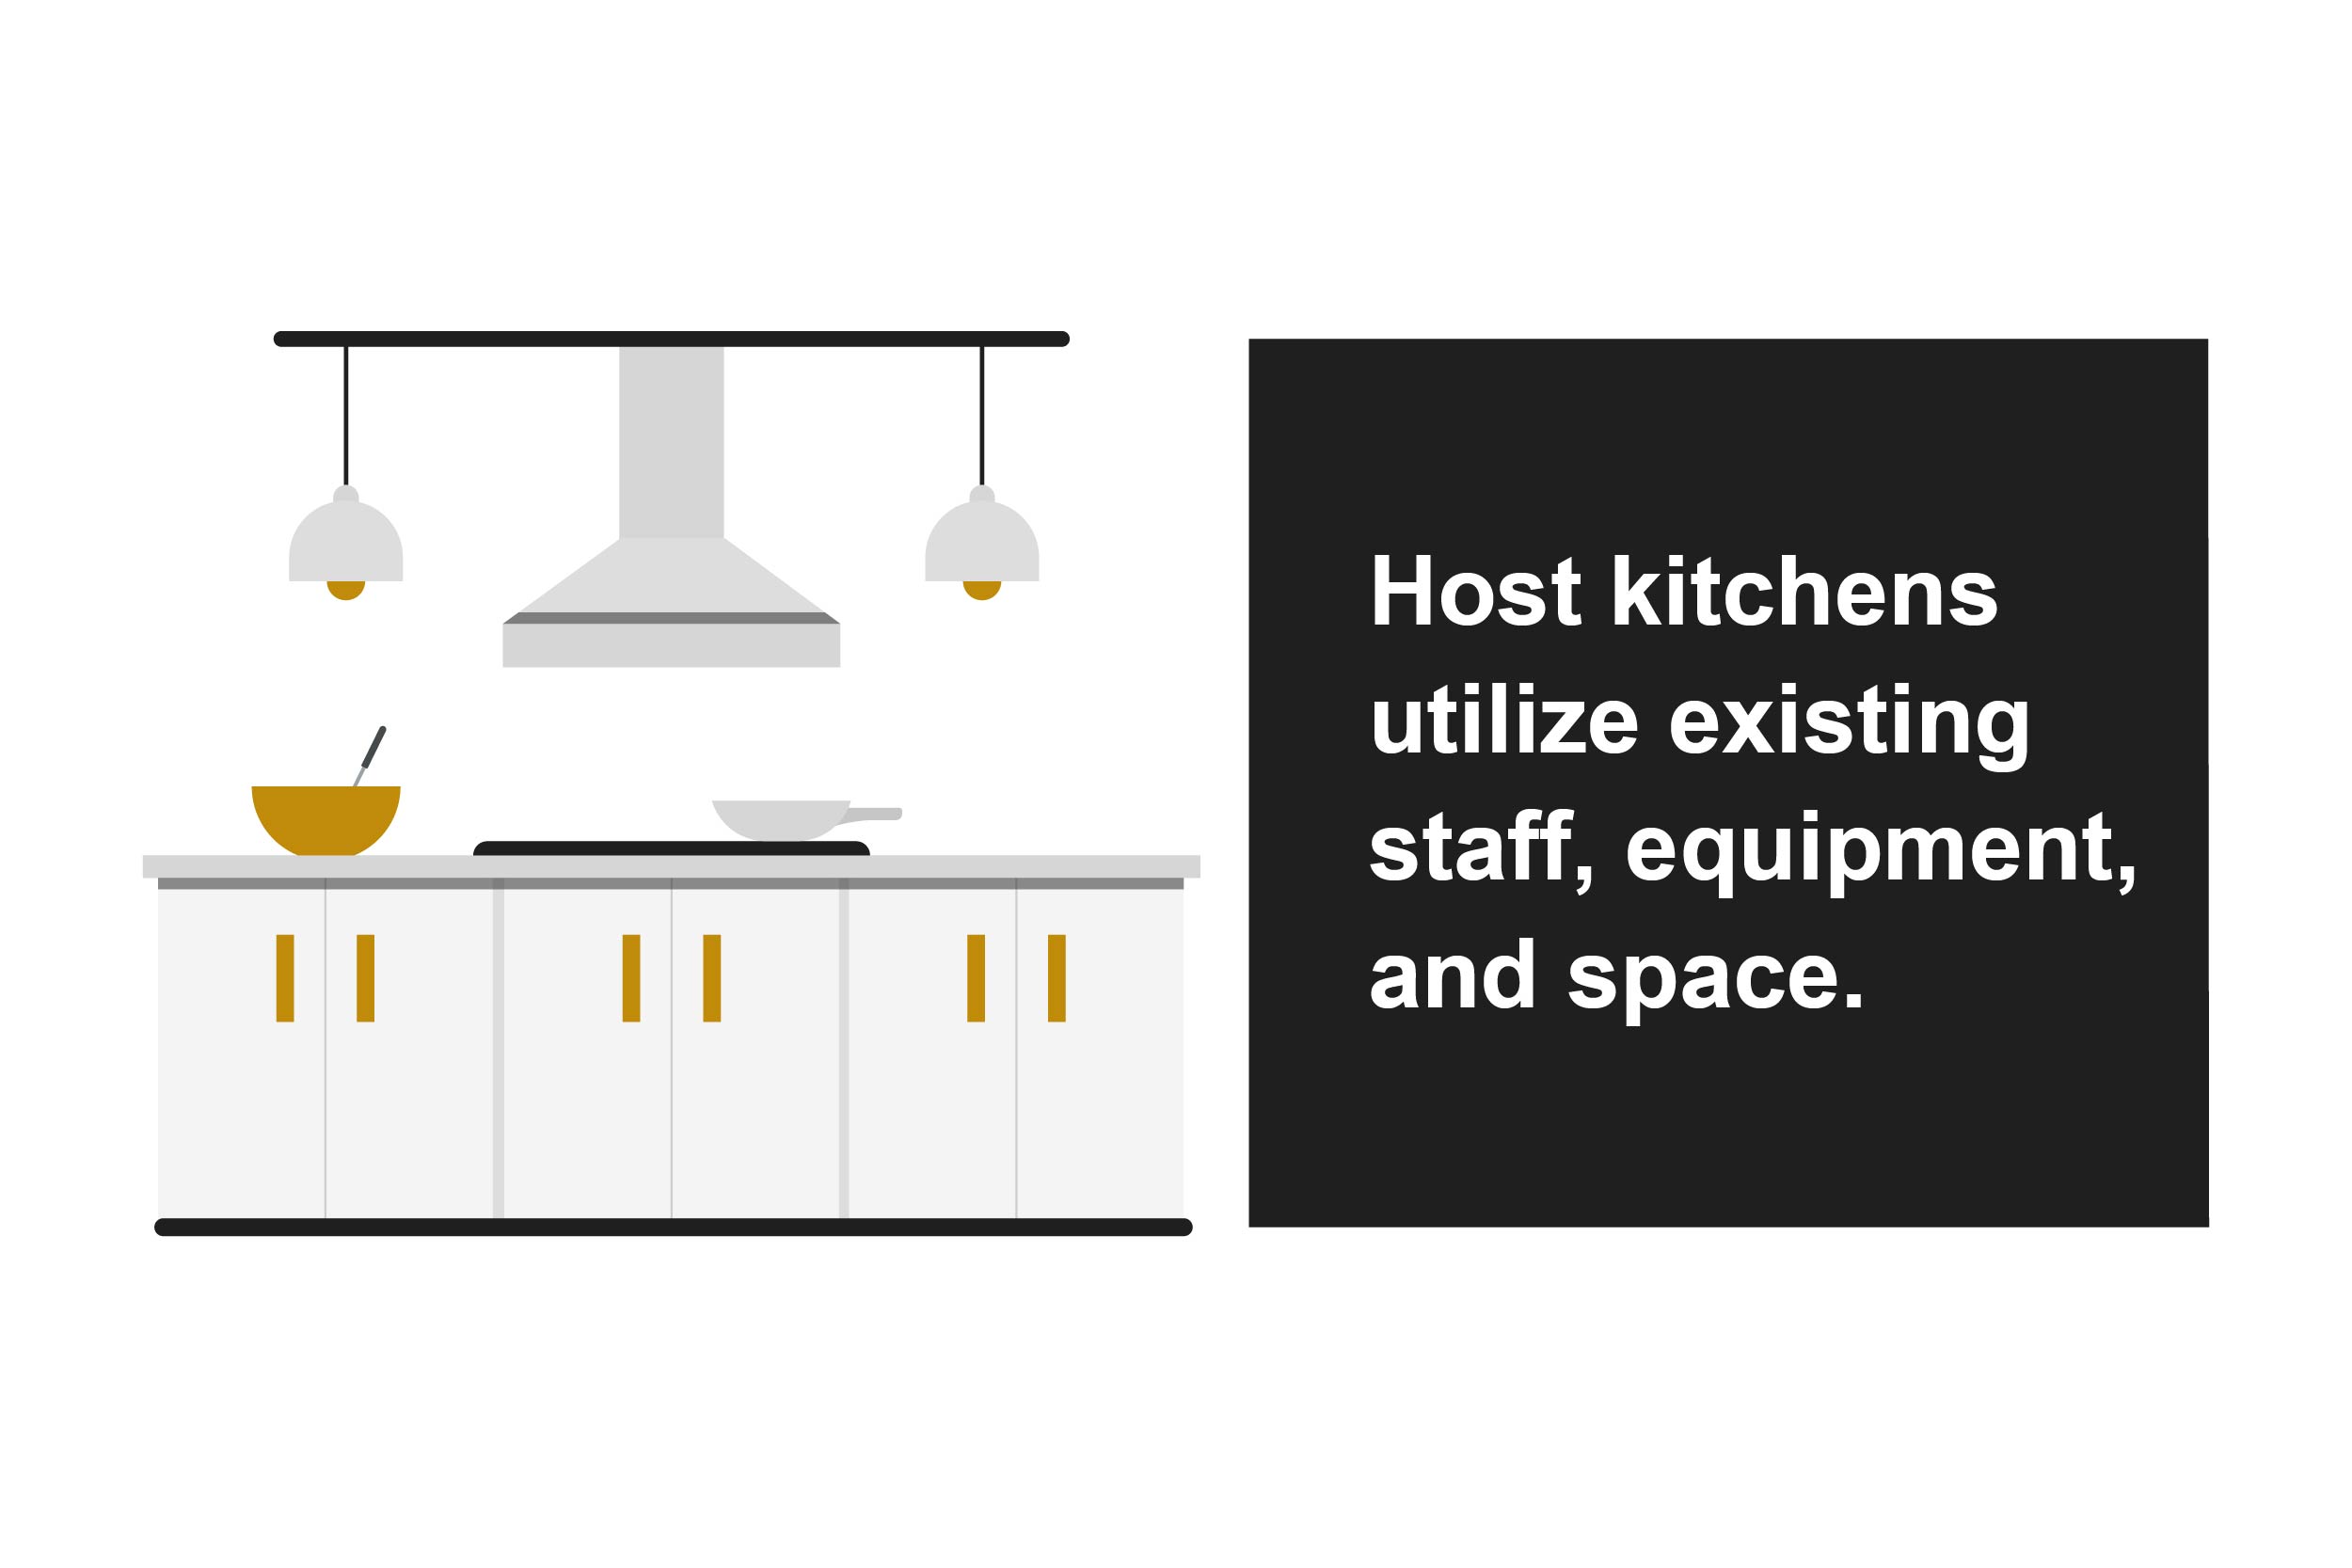 host kitchens utilize existing tools.